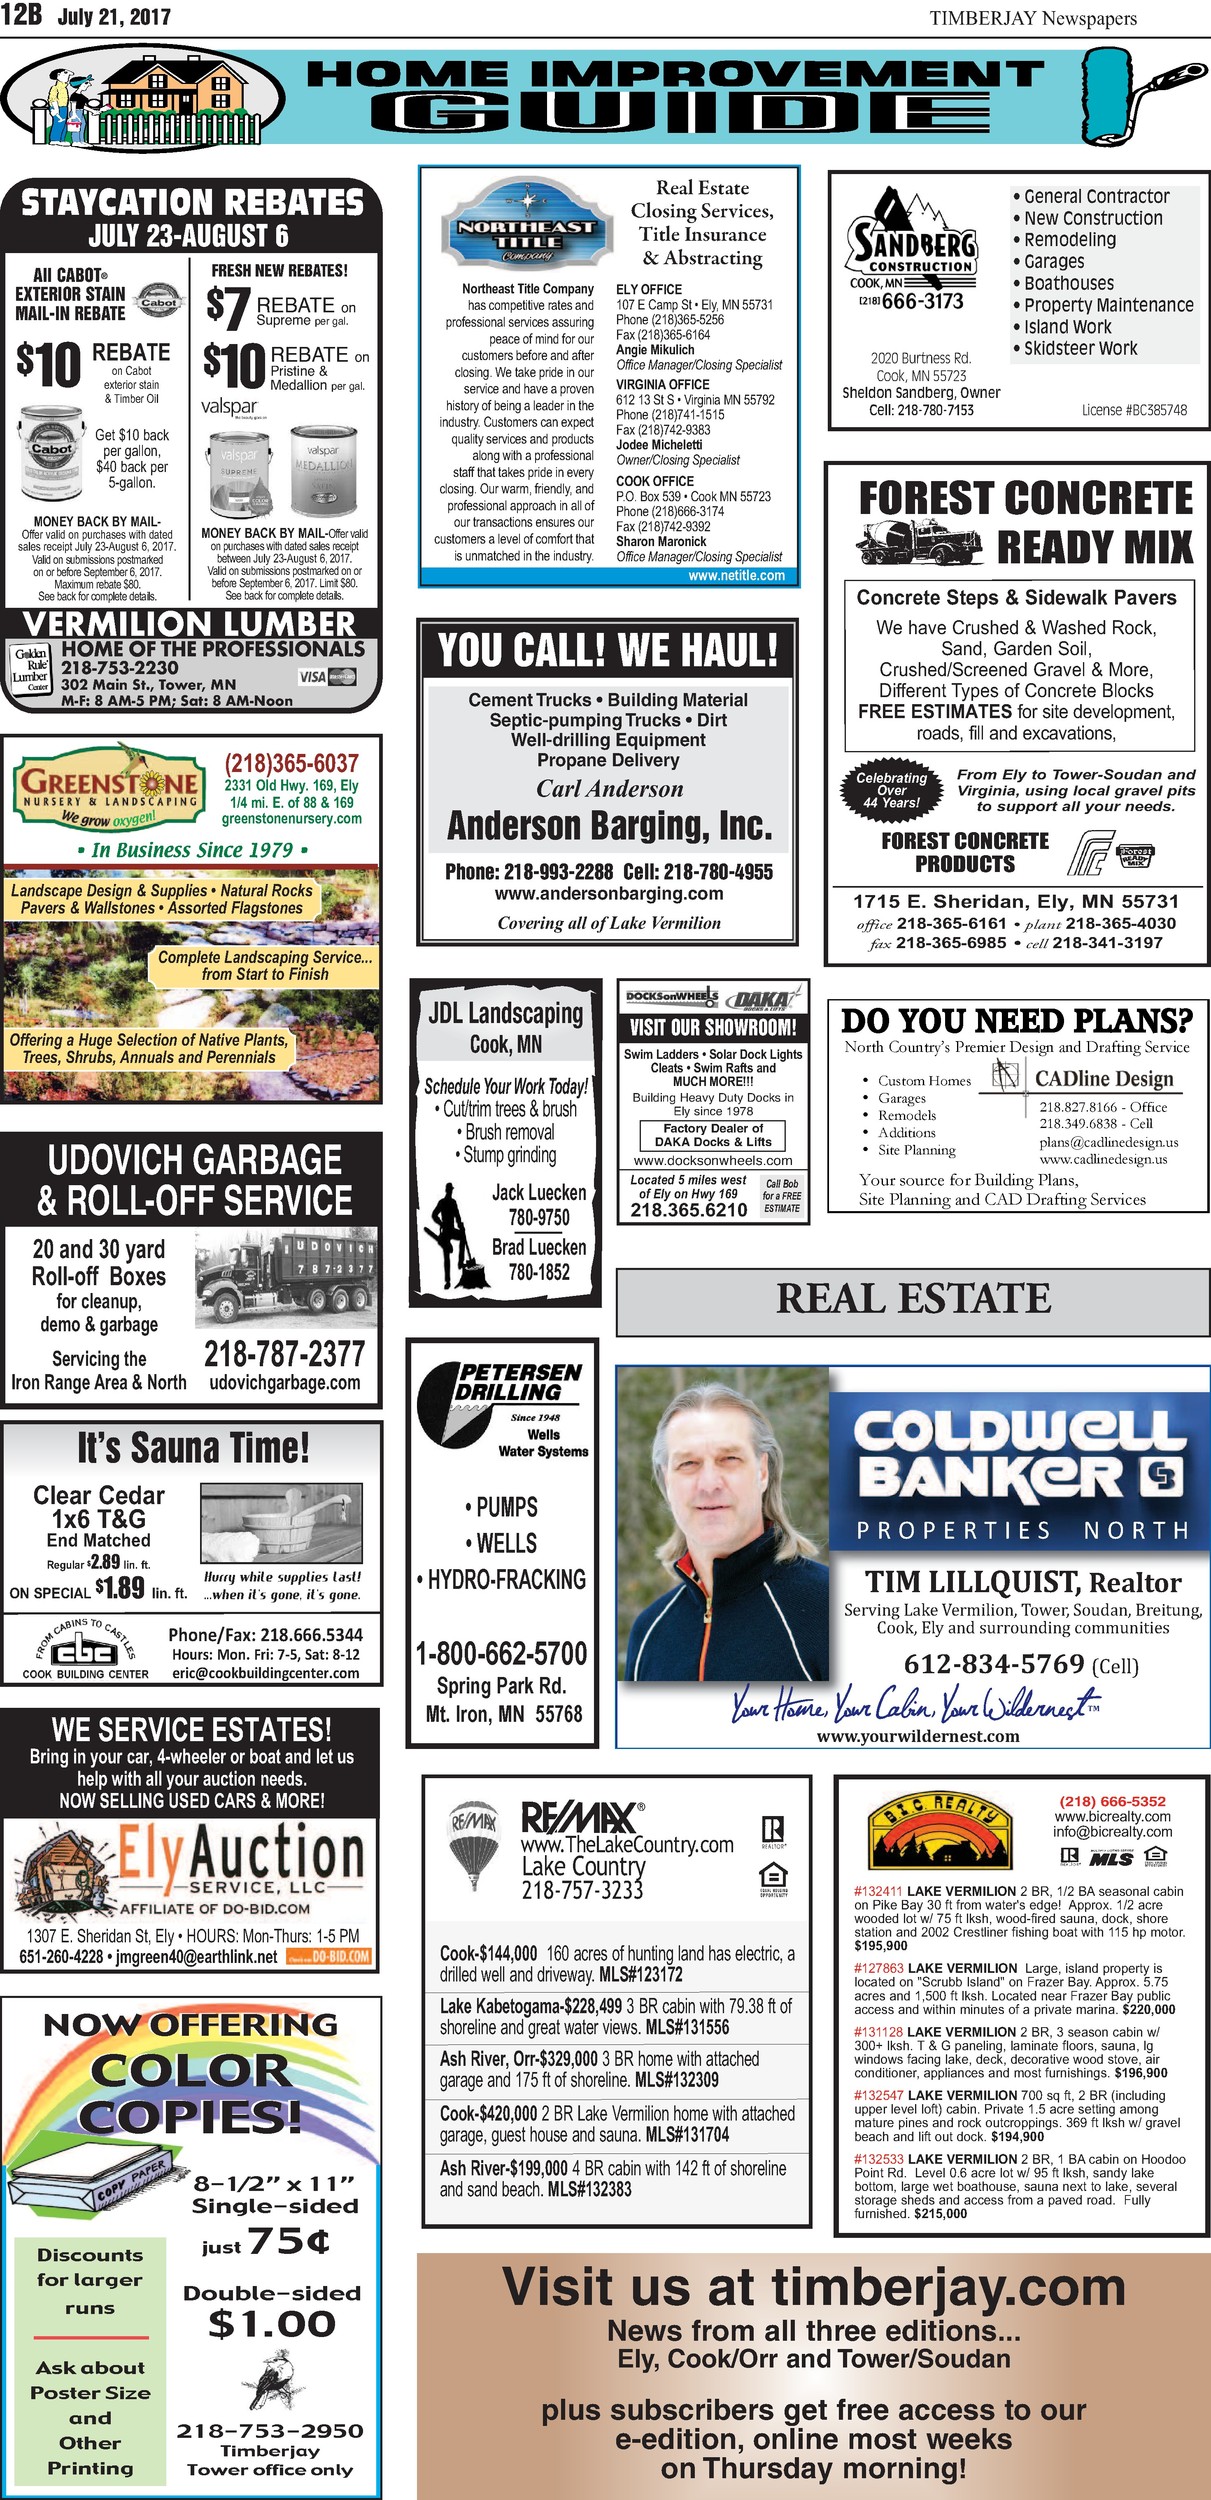 Click here for the legal notices and classifieds from page 12B